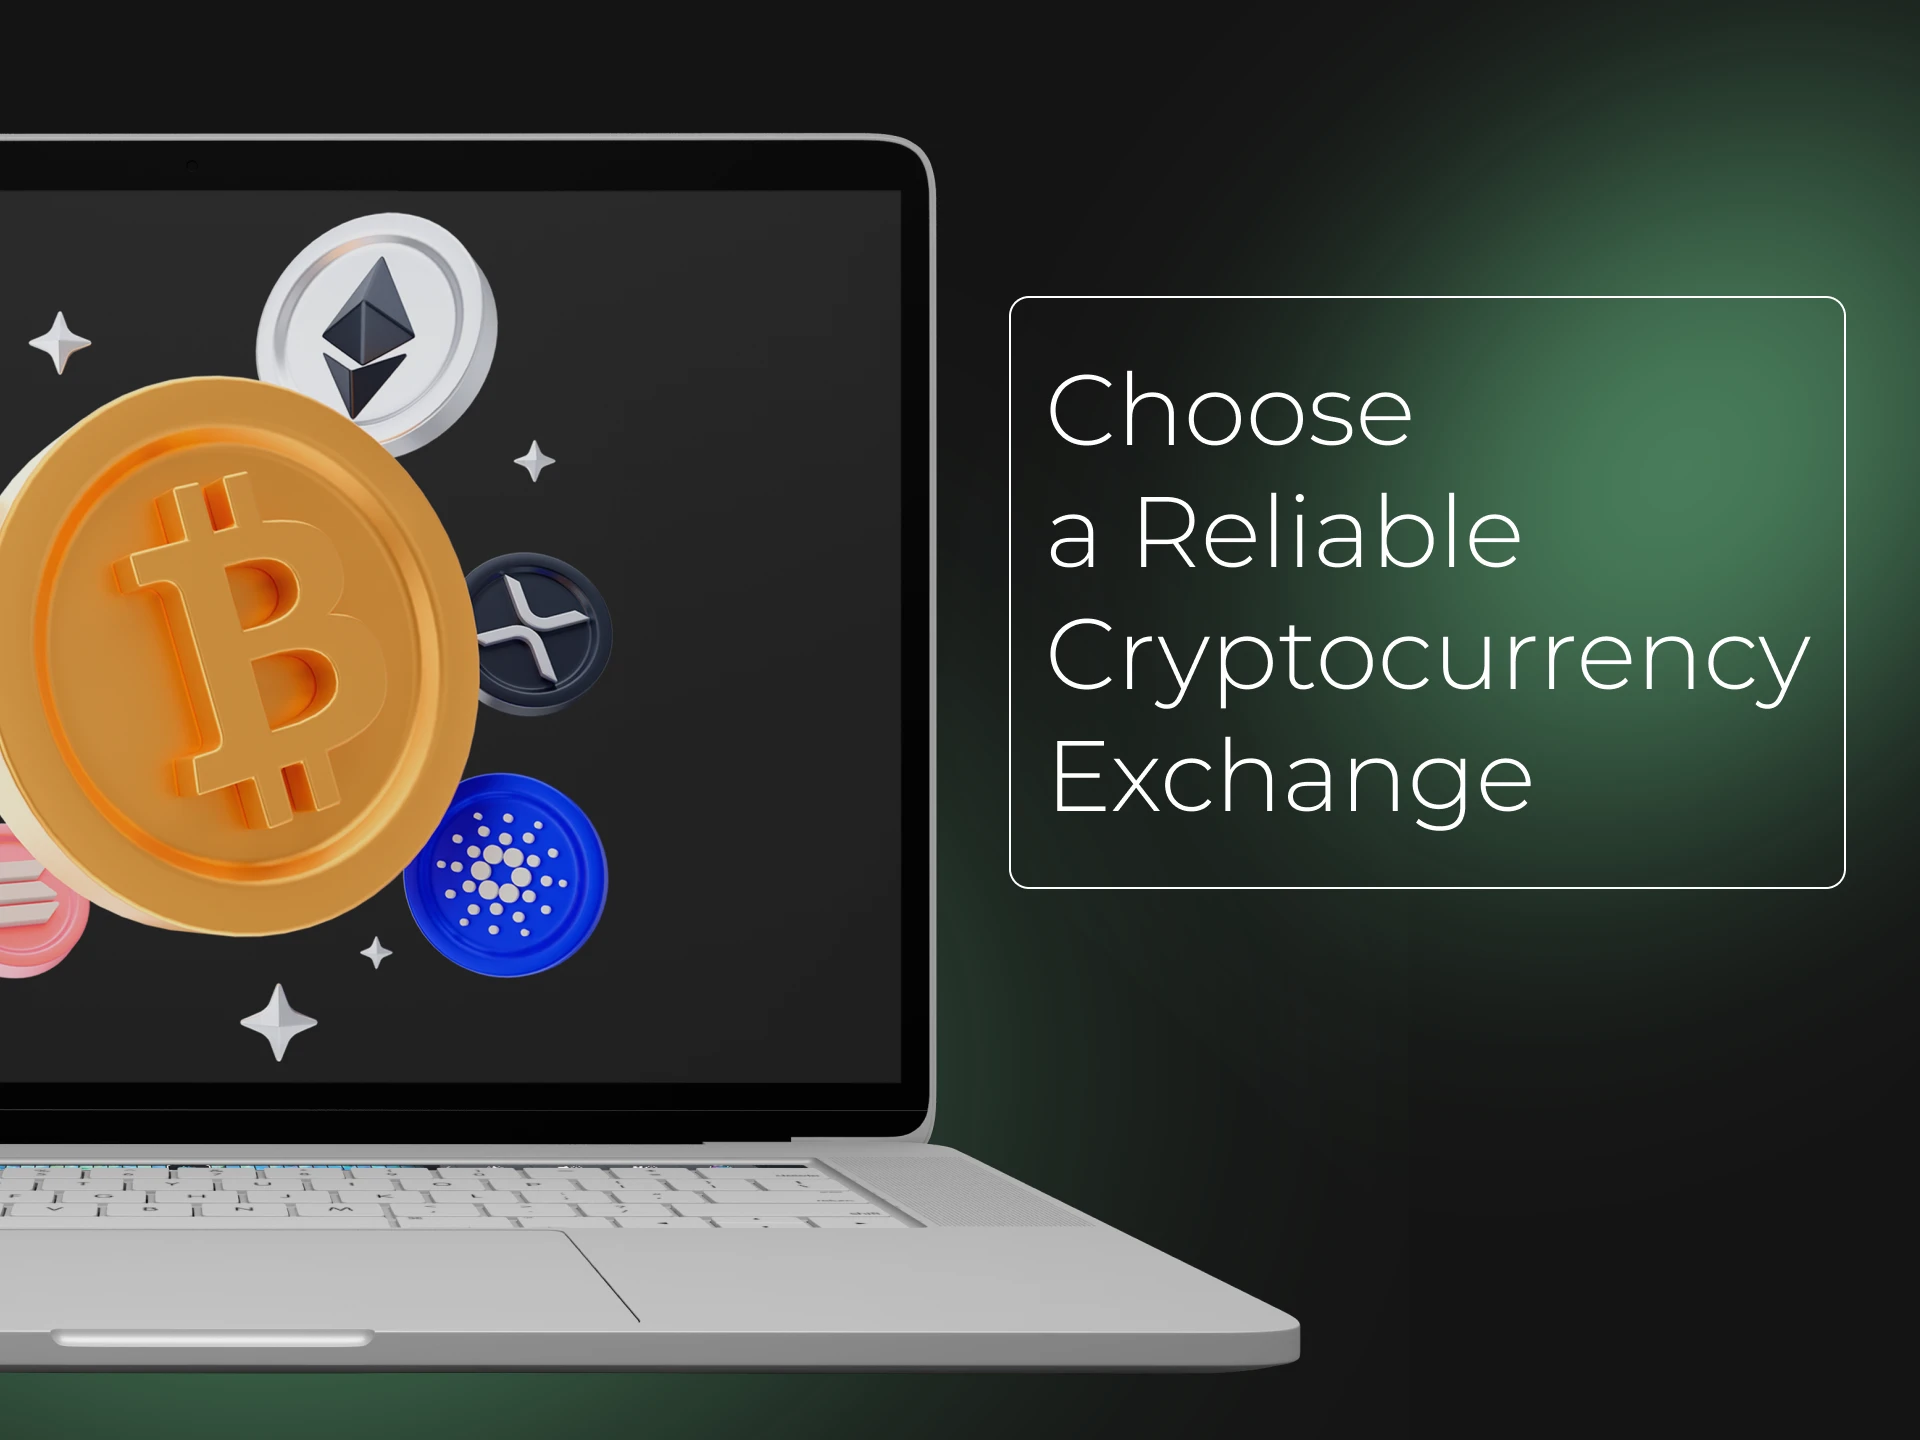 If you want to try playing in a crypto casino, first of all choose a reliable cryptocurrency exchange.